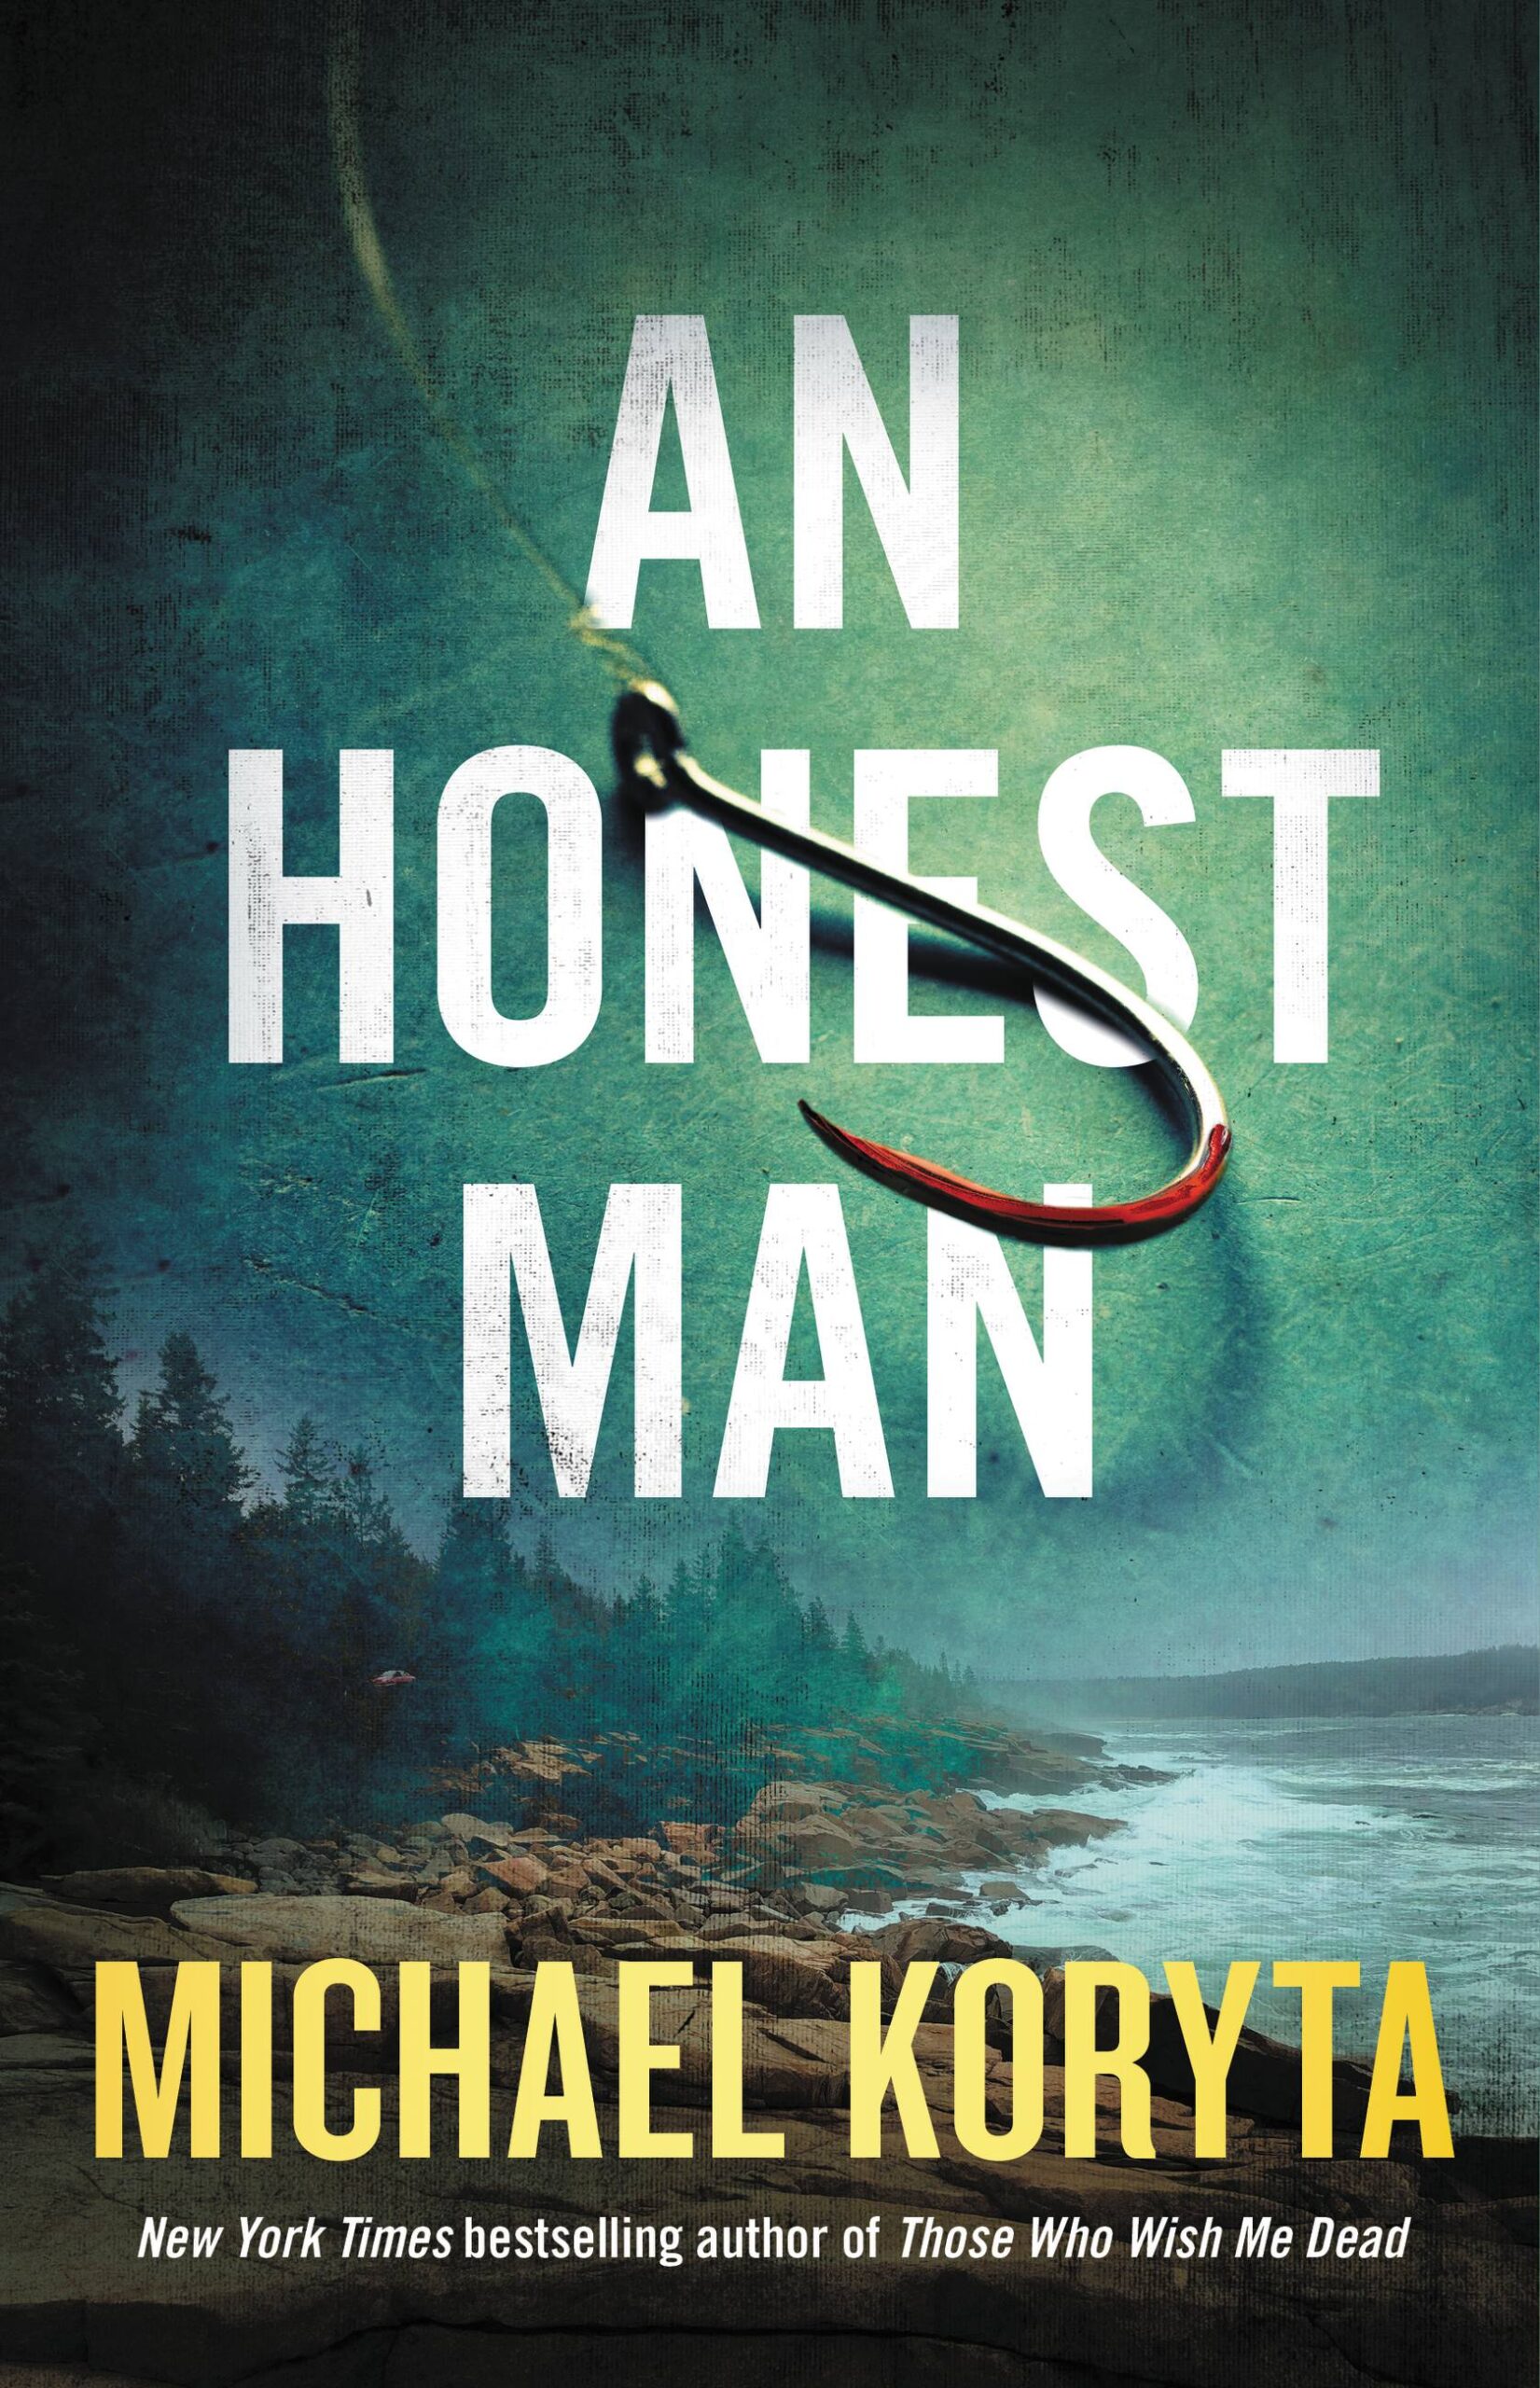 The book cover of Michael Koryta's An Honest Man